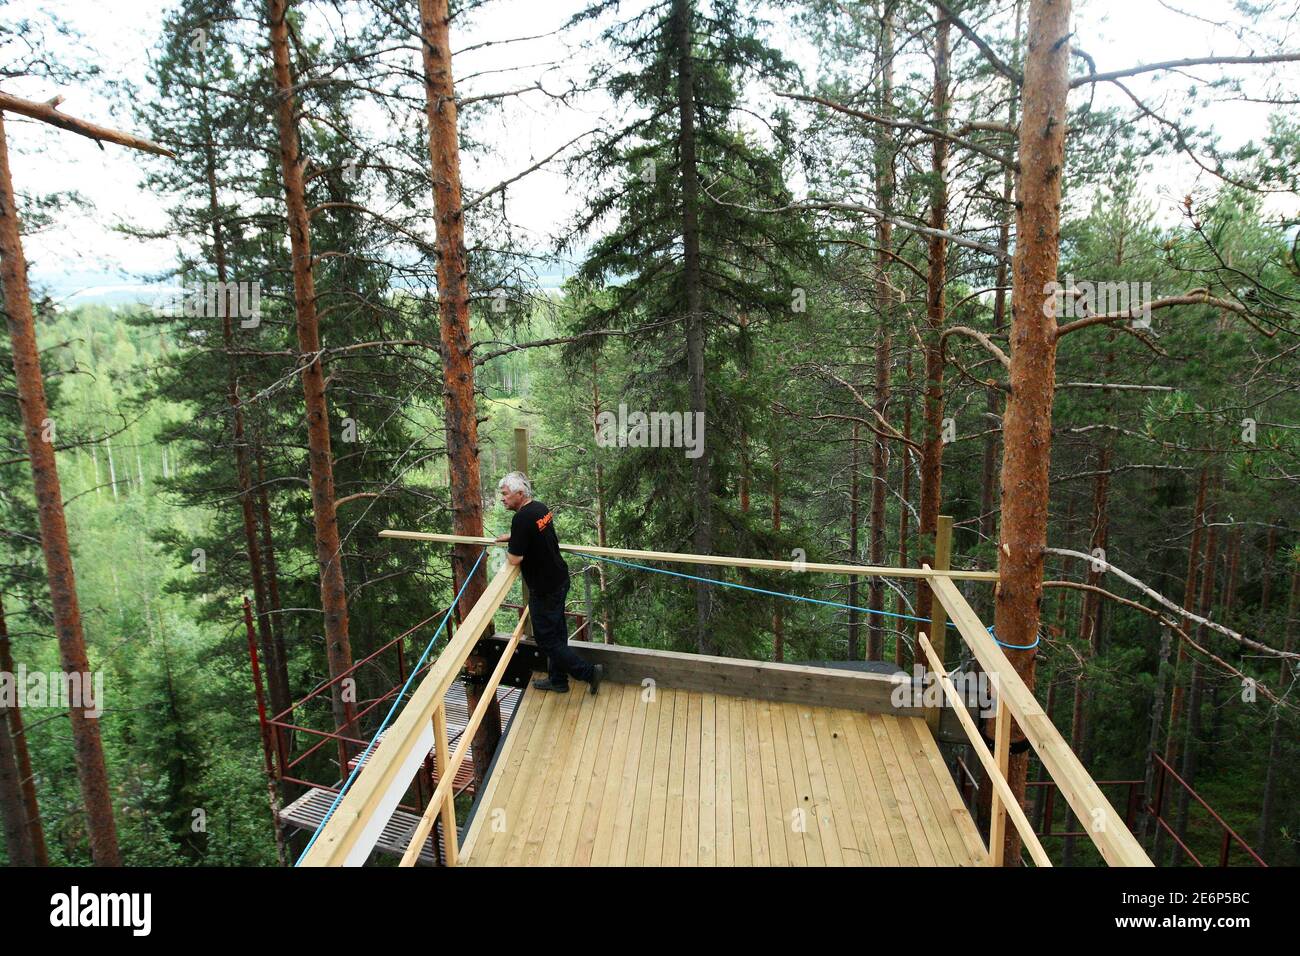 Treehotel co-founder Kent Lindvall poses for a picture on the rooftop balcony of The Cabin on the construction site of Treehotel in the Swedish village of Harads, July 5, 2010. A lofty new hotel concept is set to open in a remote village in northern Sweden, which aims to elevate the simple treehouse into a world-class destination for design-conscious travellers. Treehotel, located in Harads about 60 km south of the Arctic Circle, will consist of four rooms when it opens on July 17th: The Cabin, The Blue Cone, The Nest and The Mirrorcube. Picture taken July 5, 2010.     To match Reuters Life! S Stock Photo